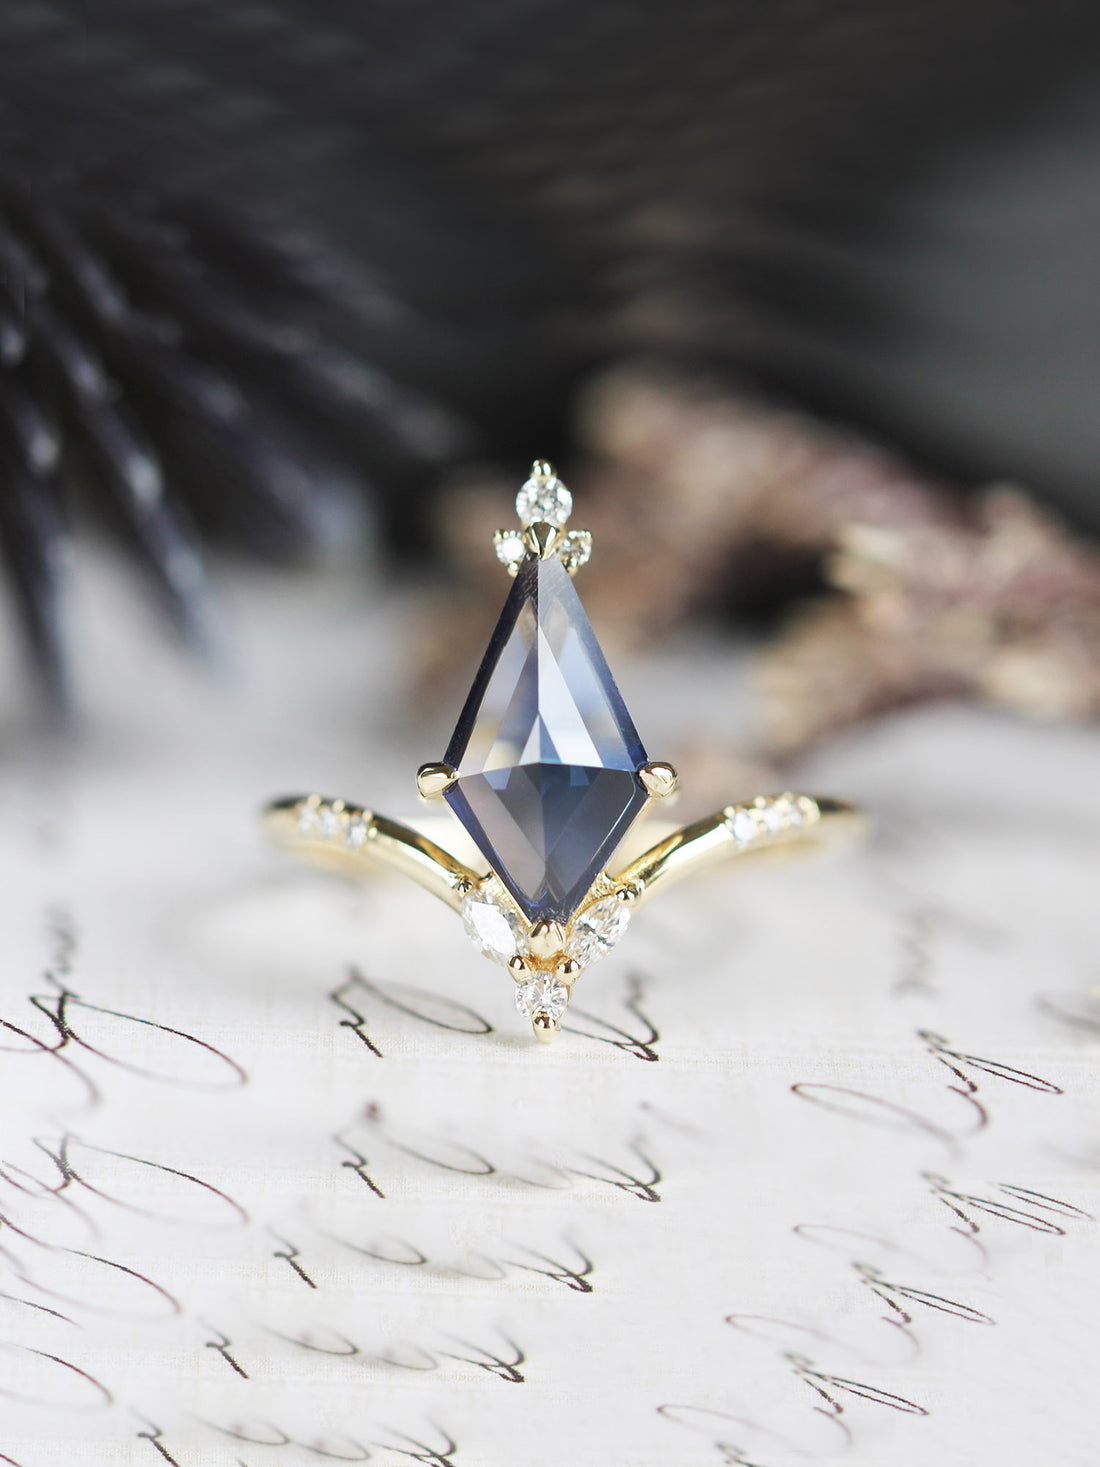 hiddenspace-engagementring-sapphire-artdeco-finejewelry-callie-proposal-ring-8